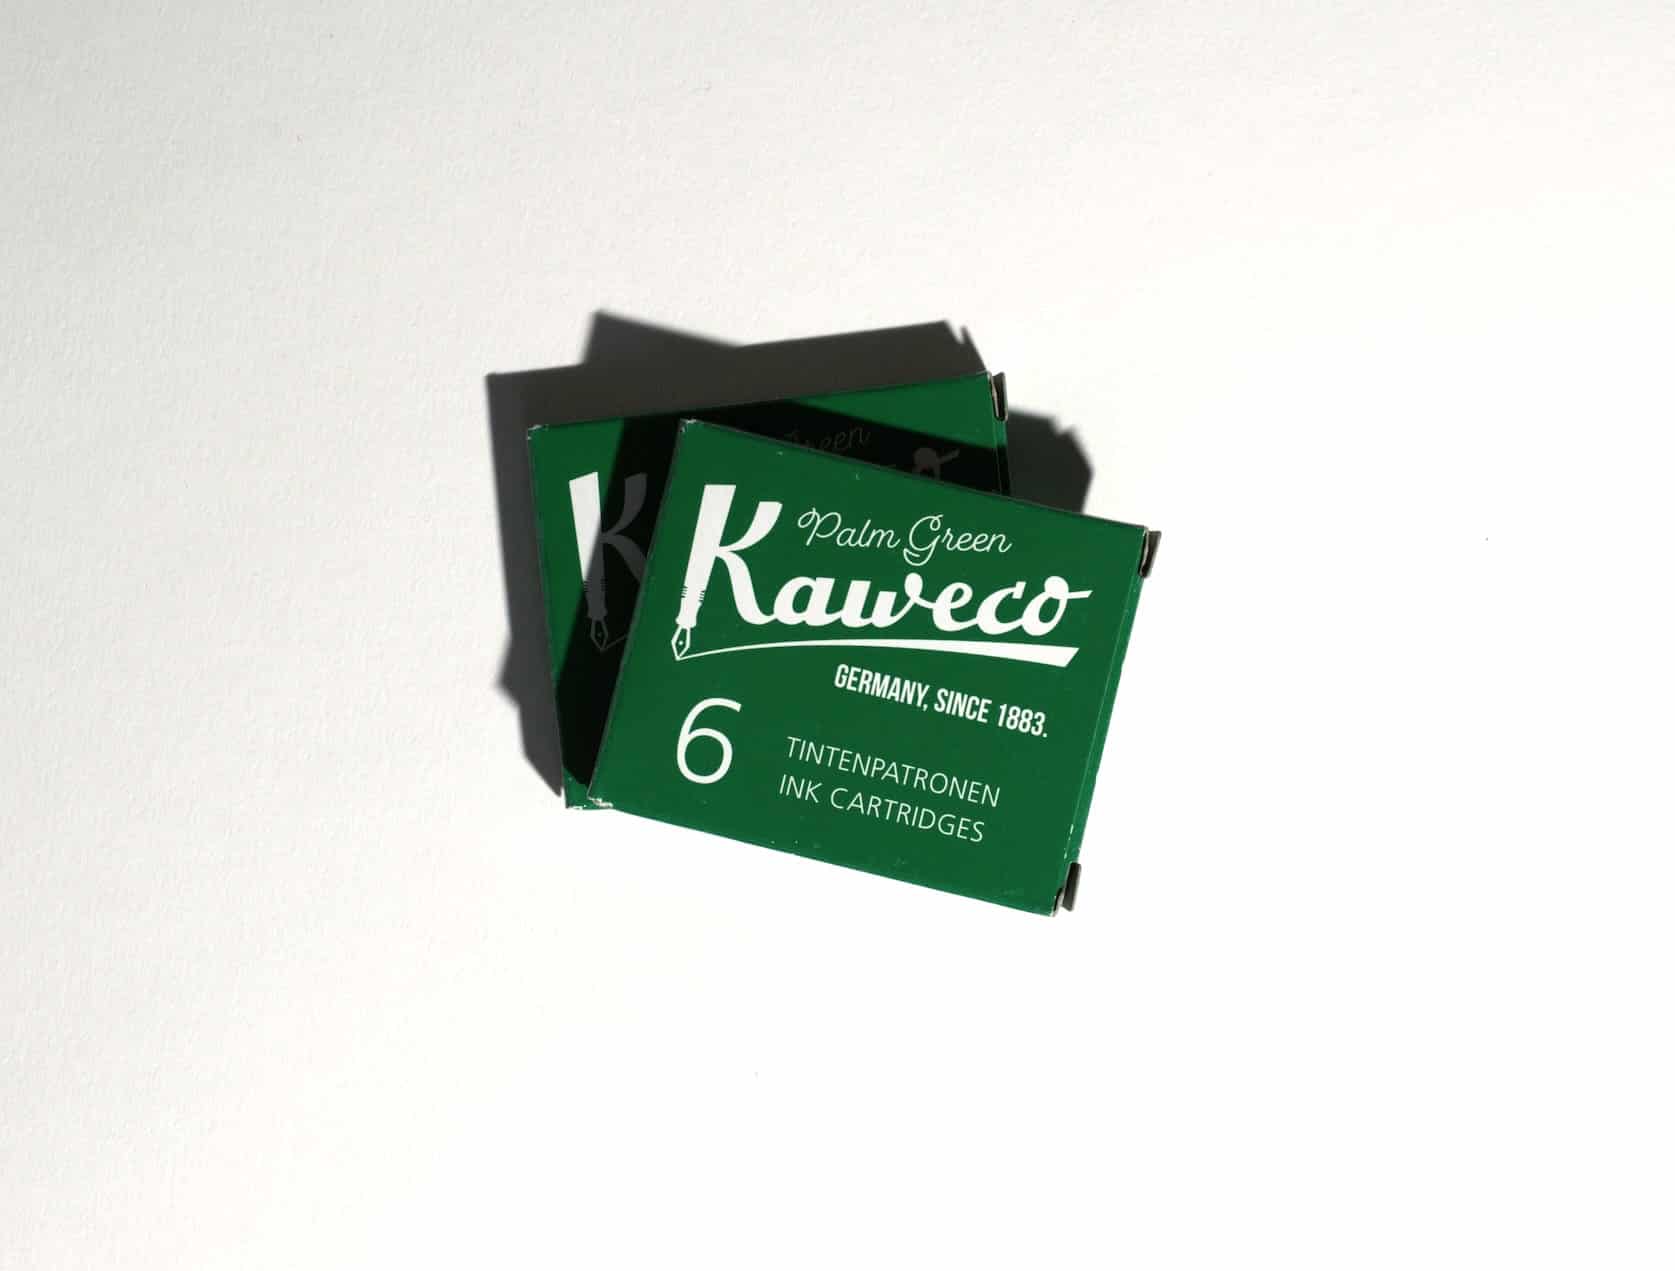 Two boxes of ink cartridges lie on a white surface. Text on packaging reads: Kaweco. Palm Green. Germany, since 1883. 6 Tintenpatronen. Ink Cartridges.